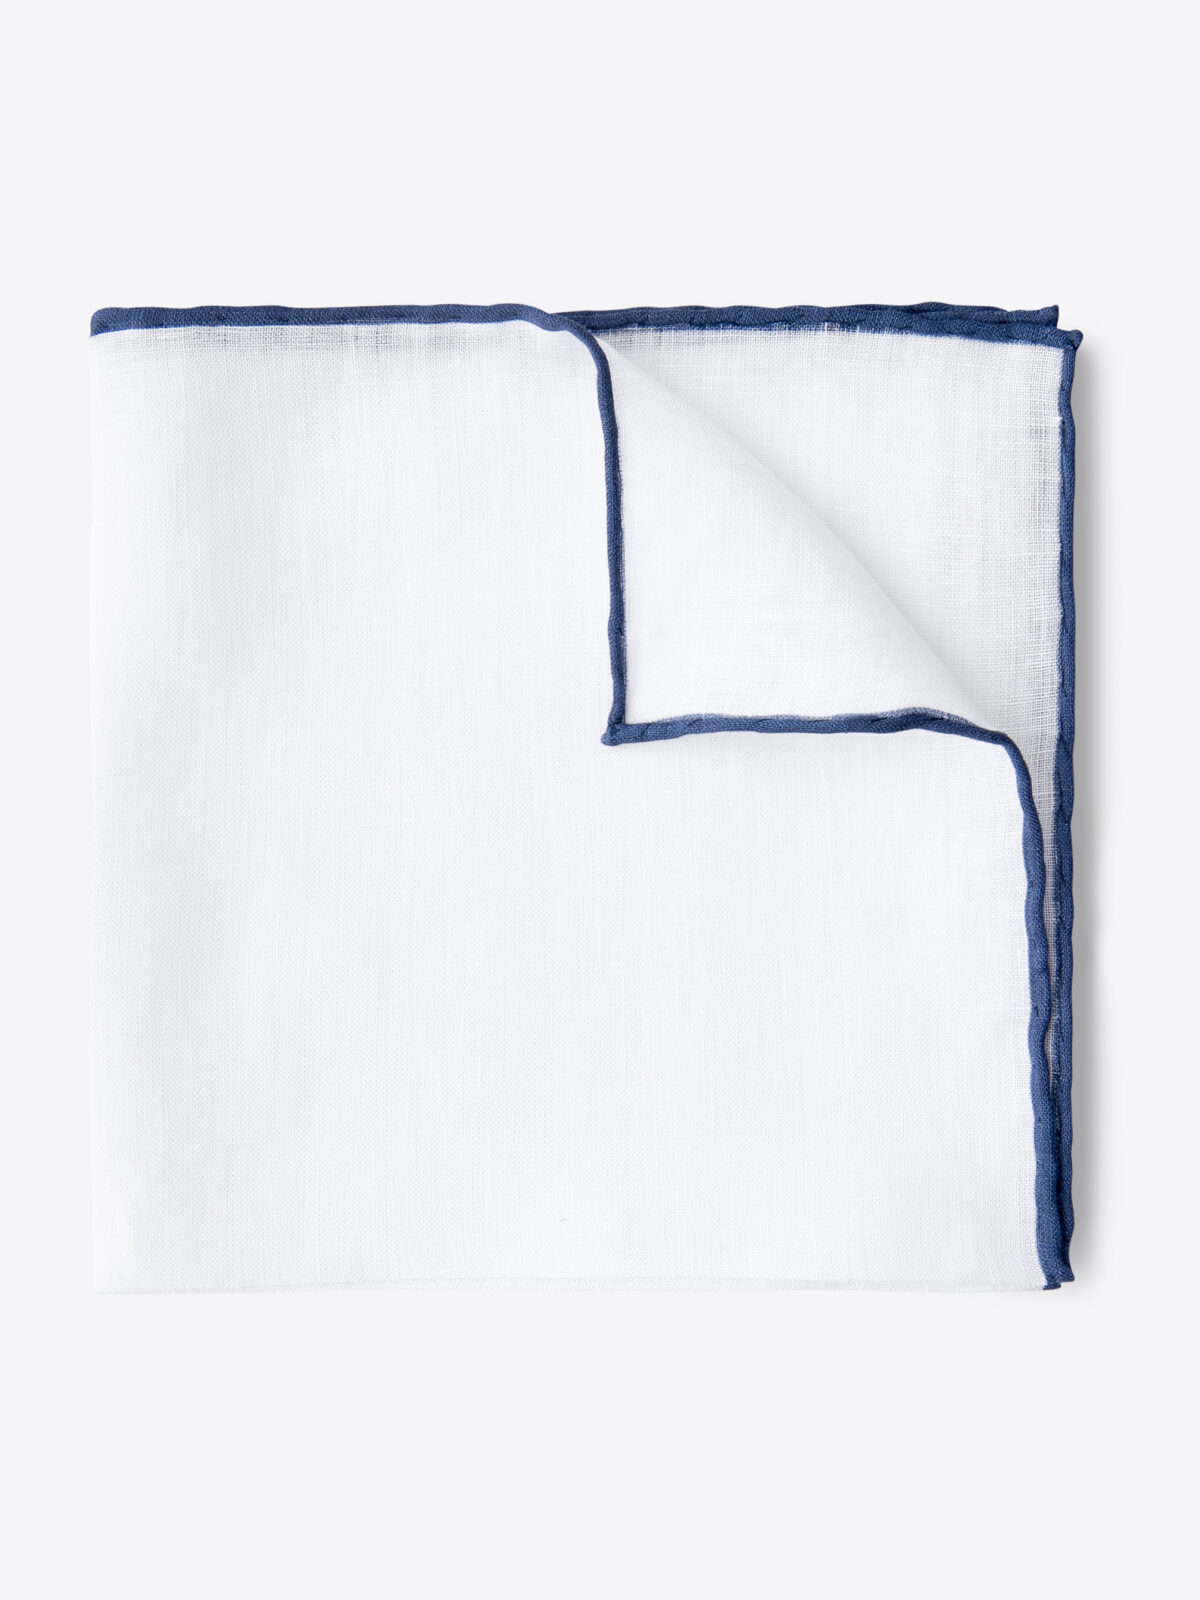 White with Navy Tipping Linen Pocket Square